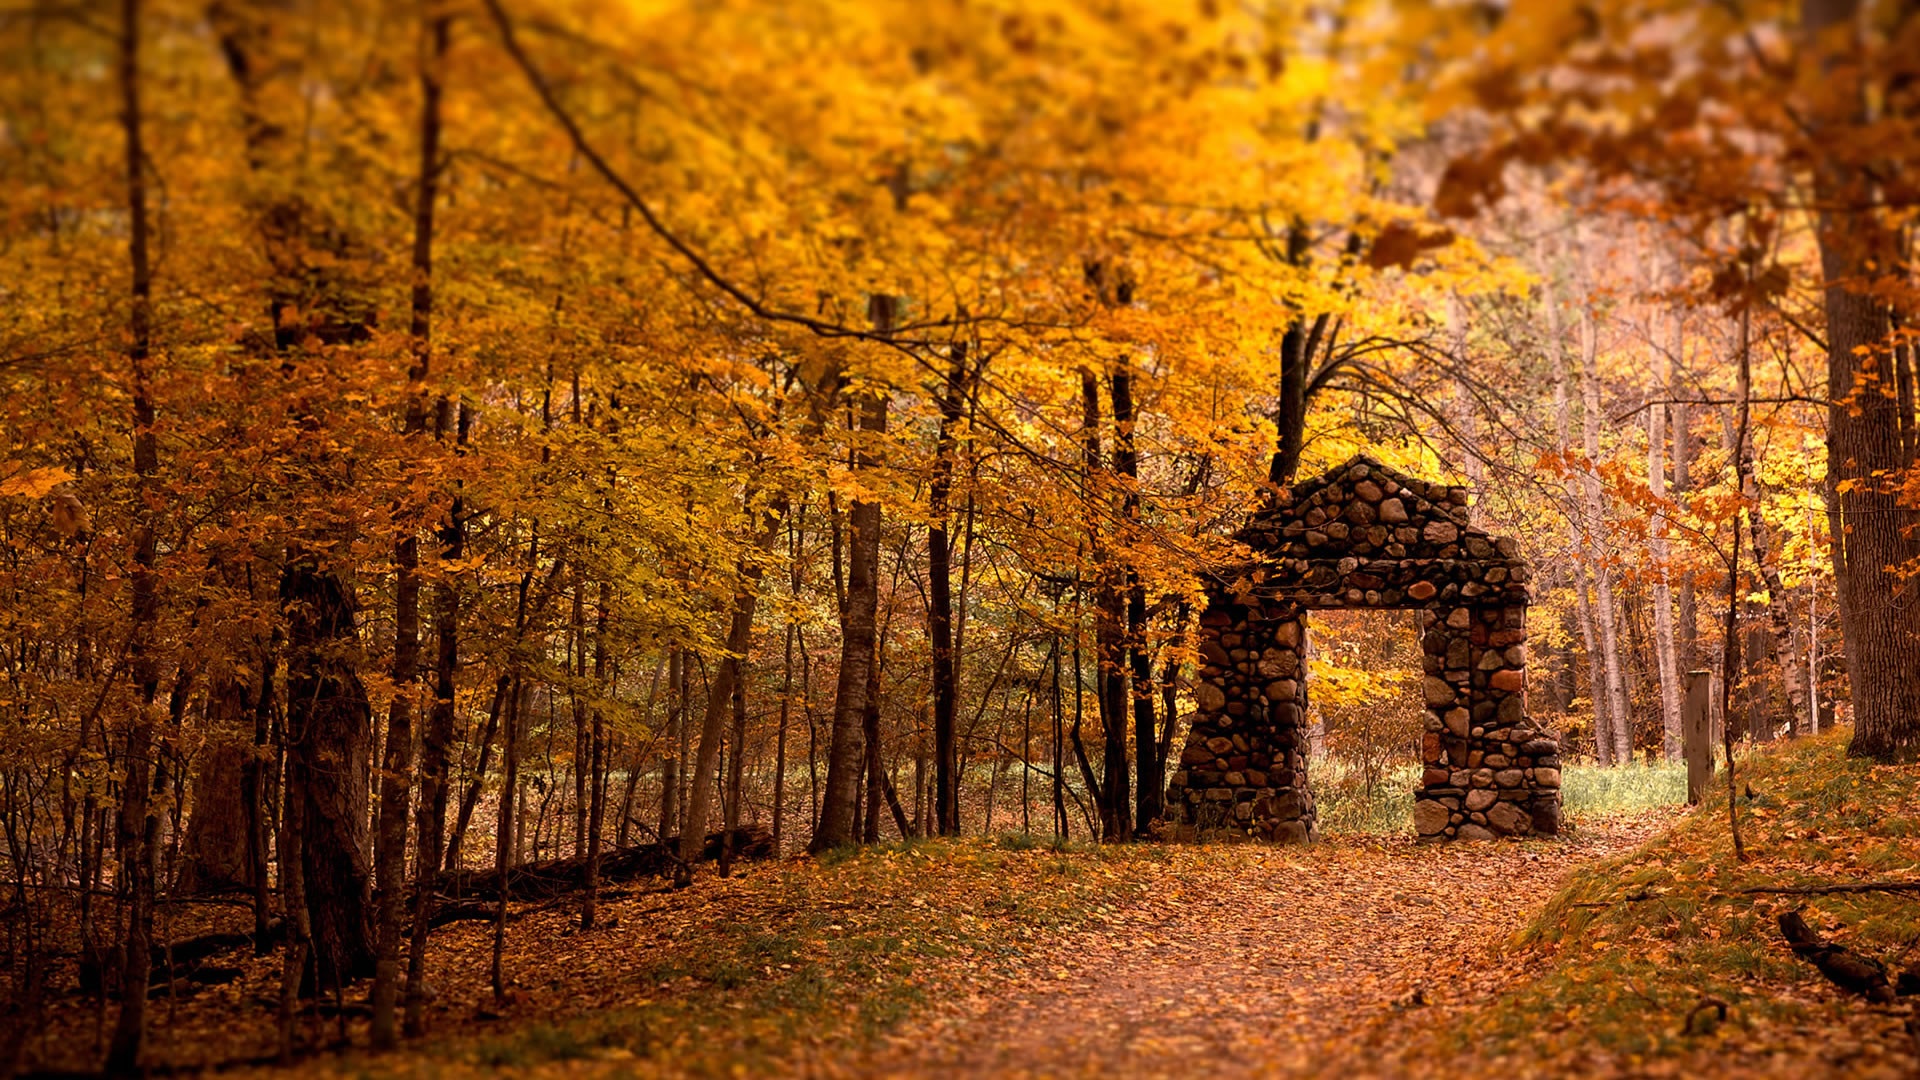 1920x1080 Autumn Desktop Wallpapers, Autumn Images Free | Cool Wallpapers